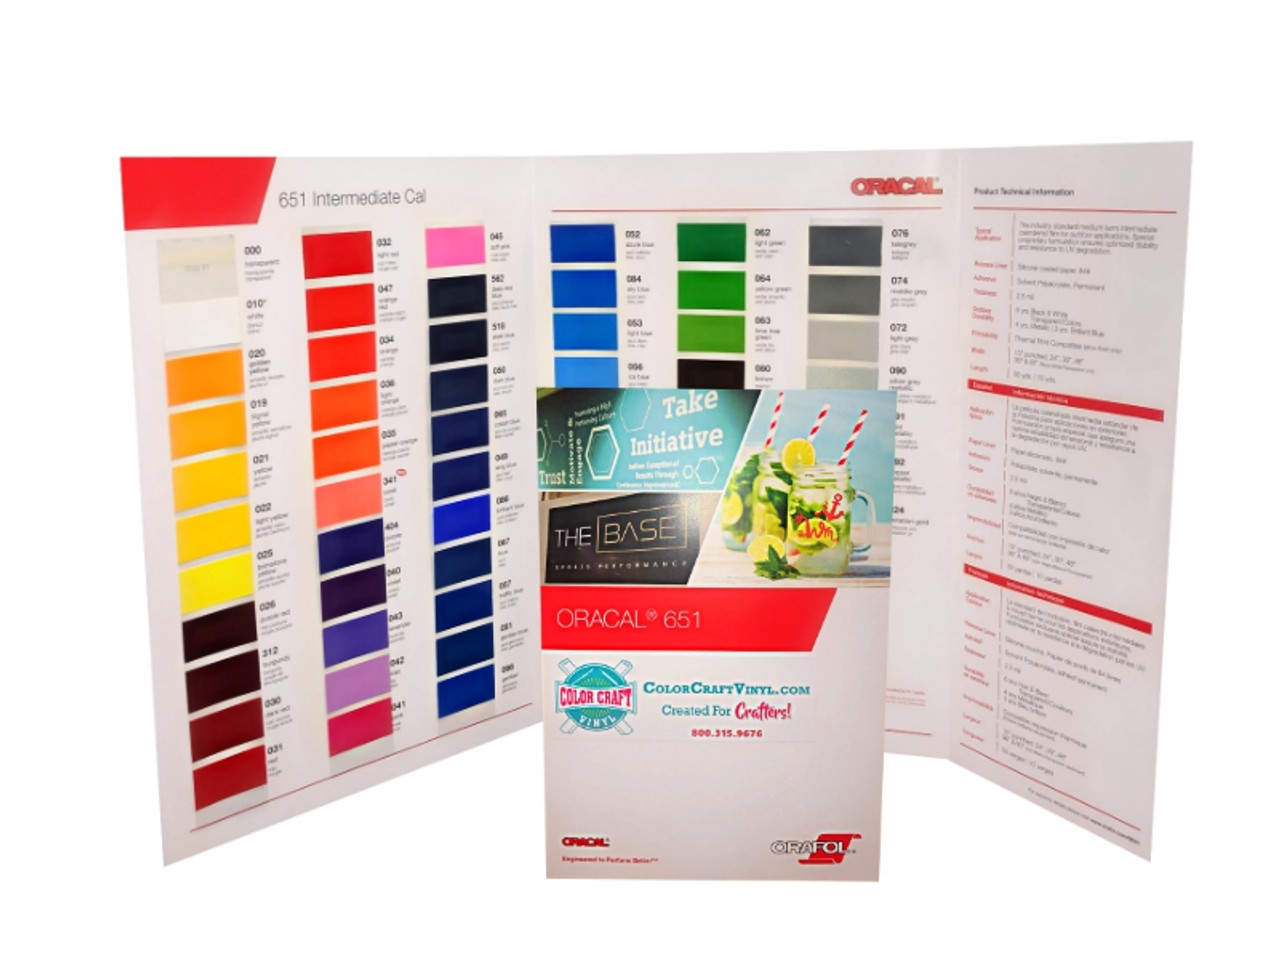 Oracal 651 Glossy Vinyl 24 Pack of Top Colors 12 x Sheets